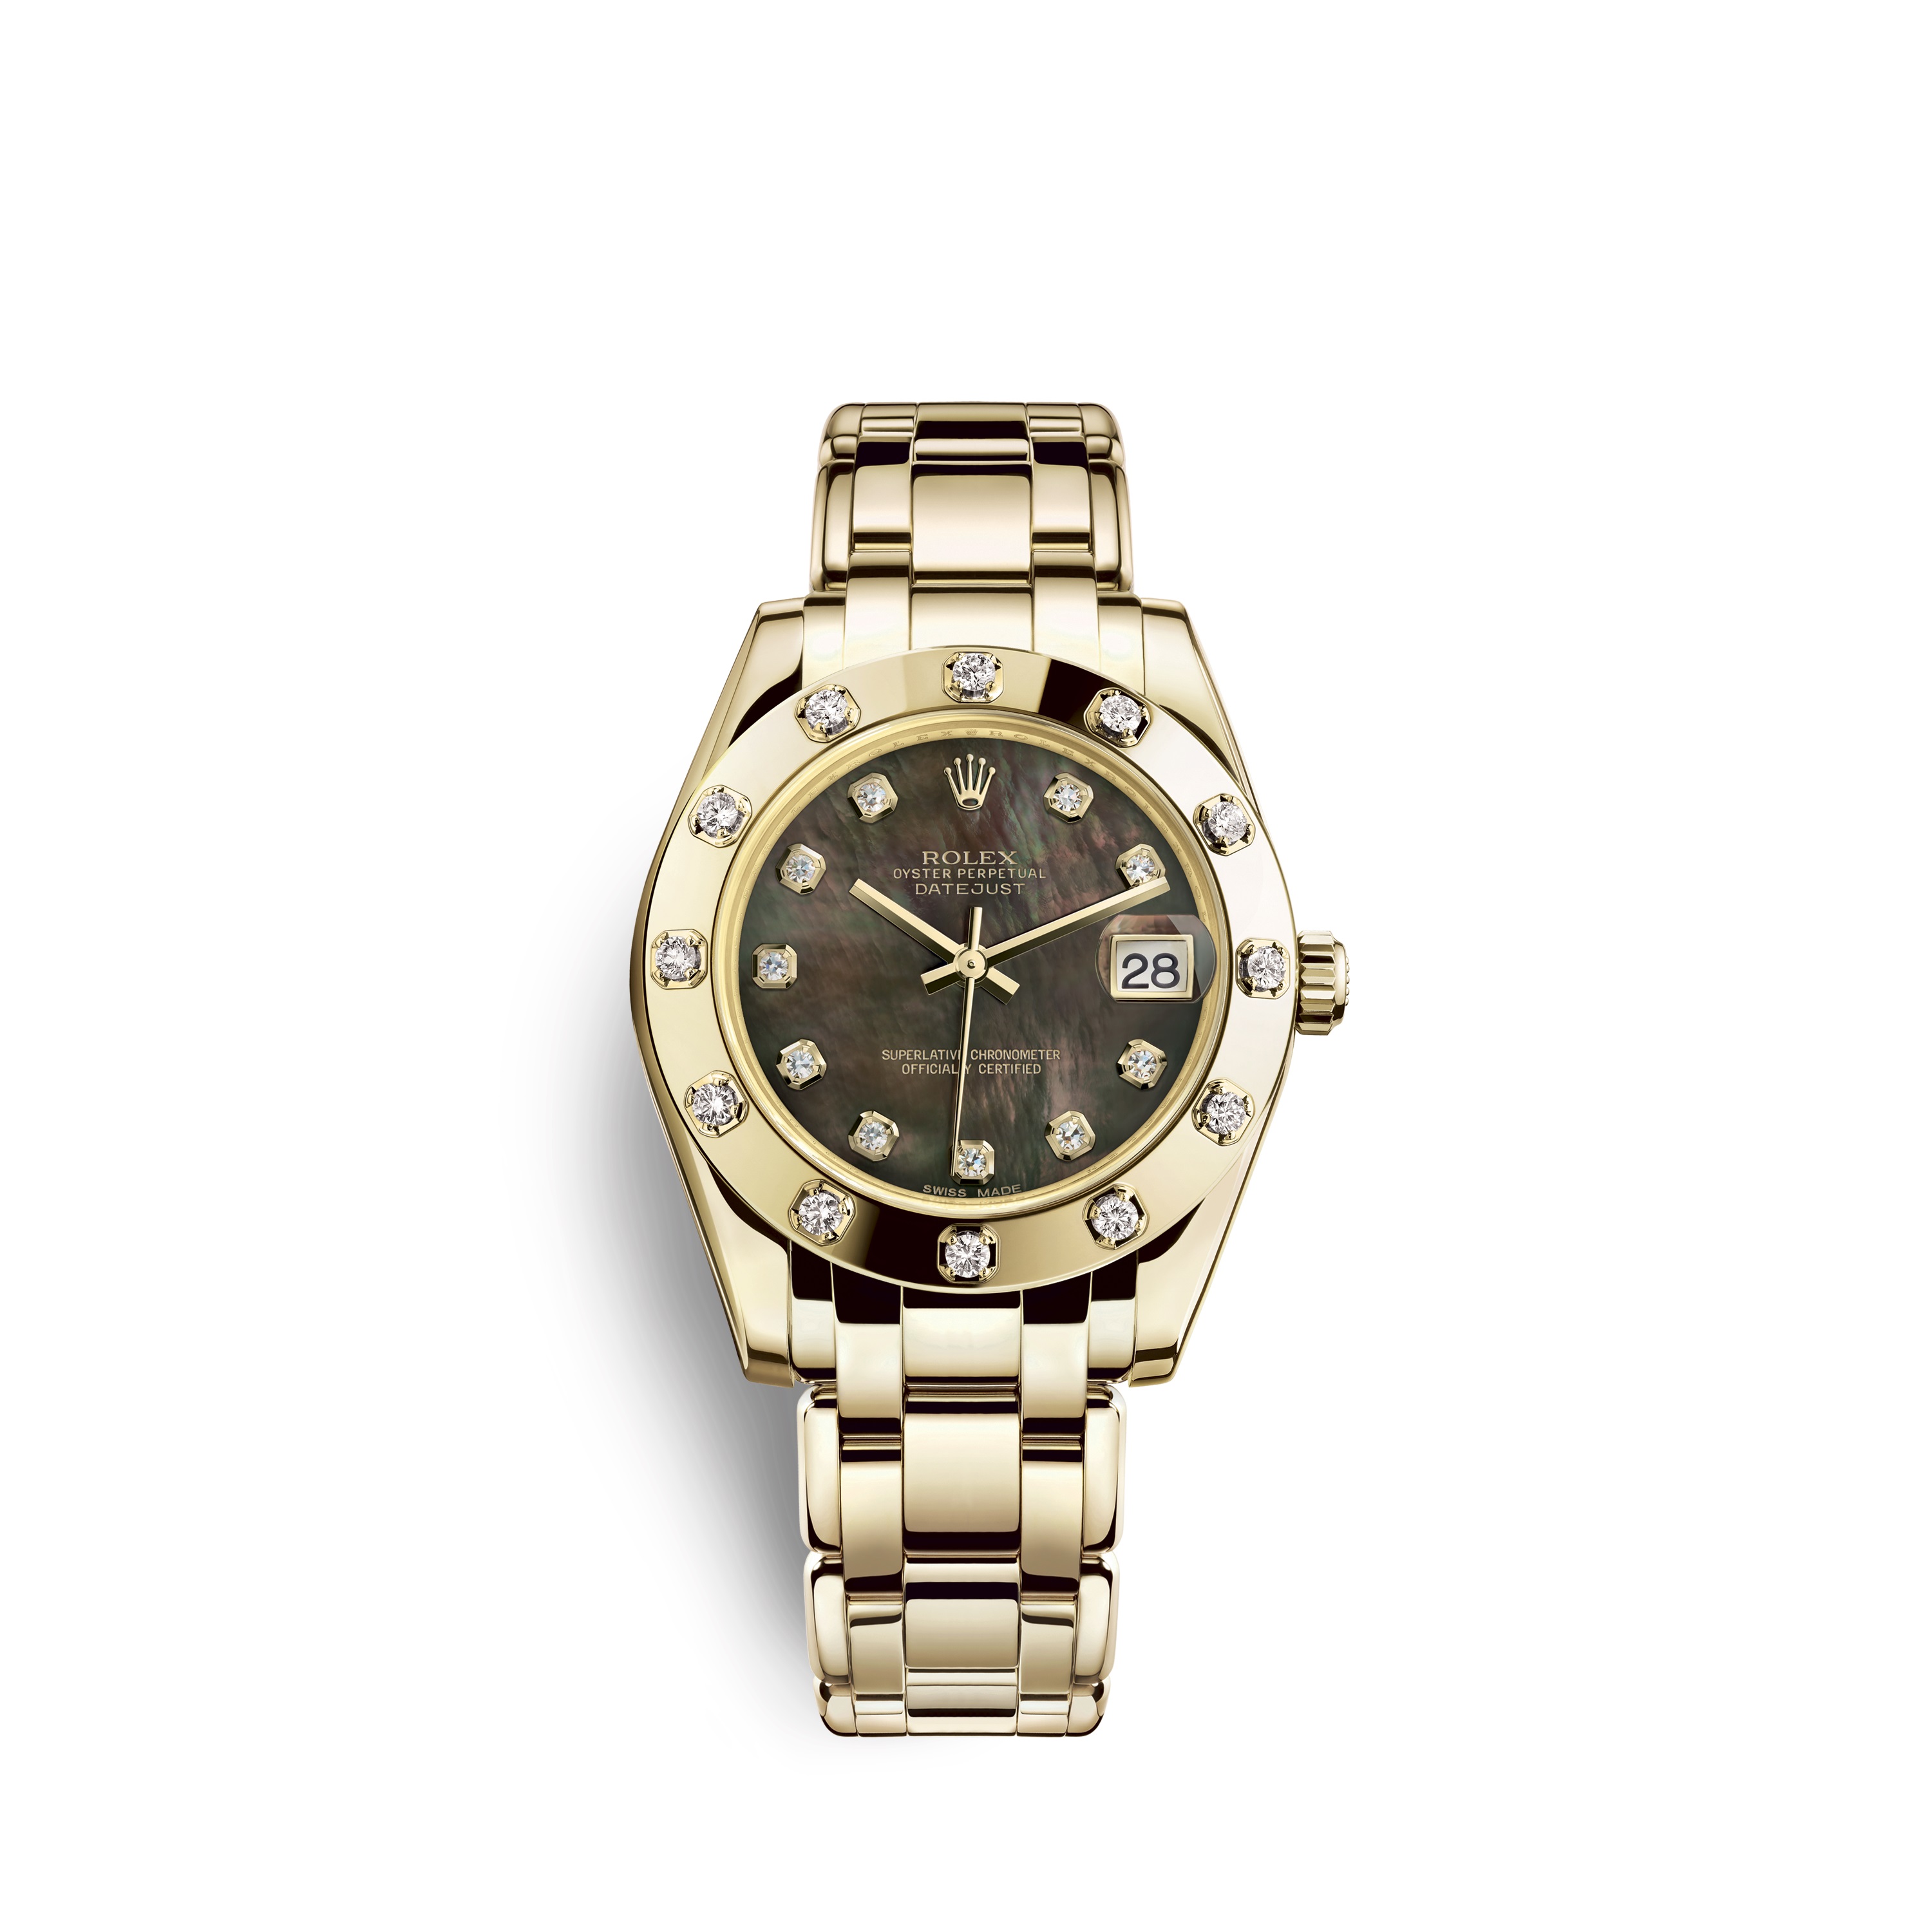 Pearlmaster 34 81318 Gold & Diamonds Watch (Black Mother-of-Pearl Set with Diamonds)